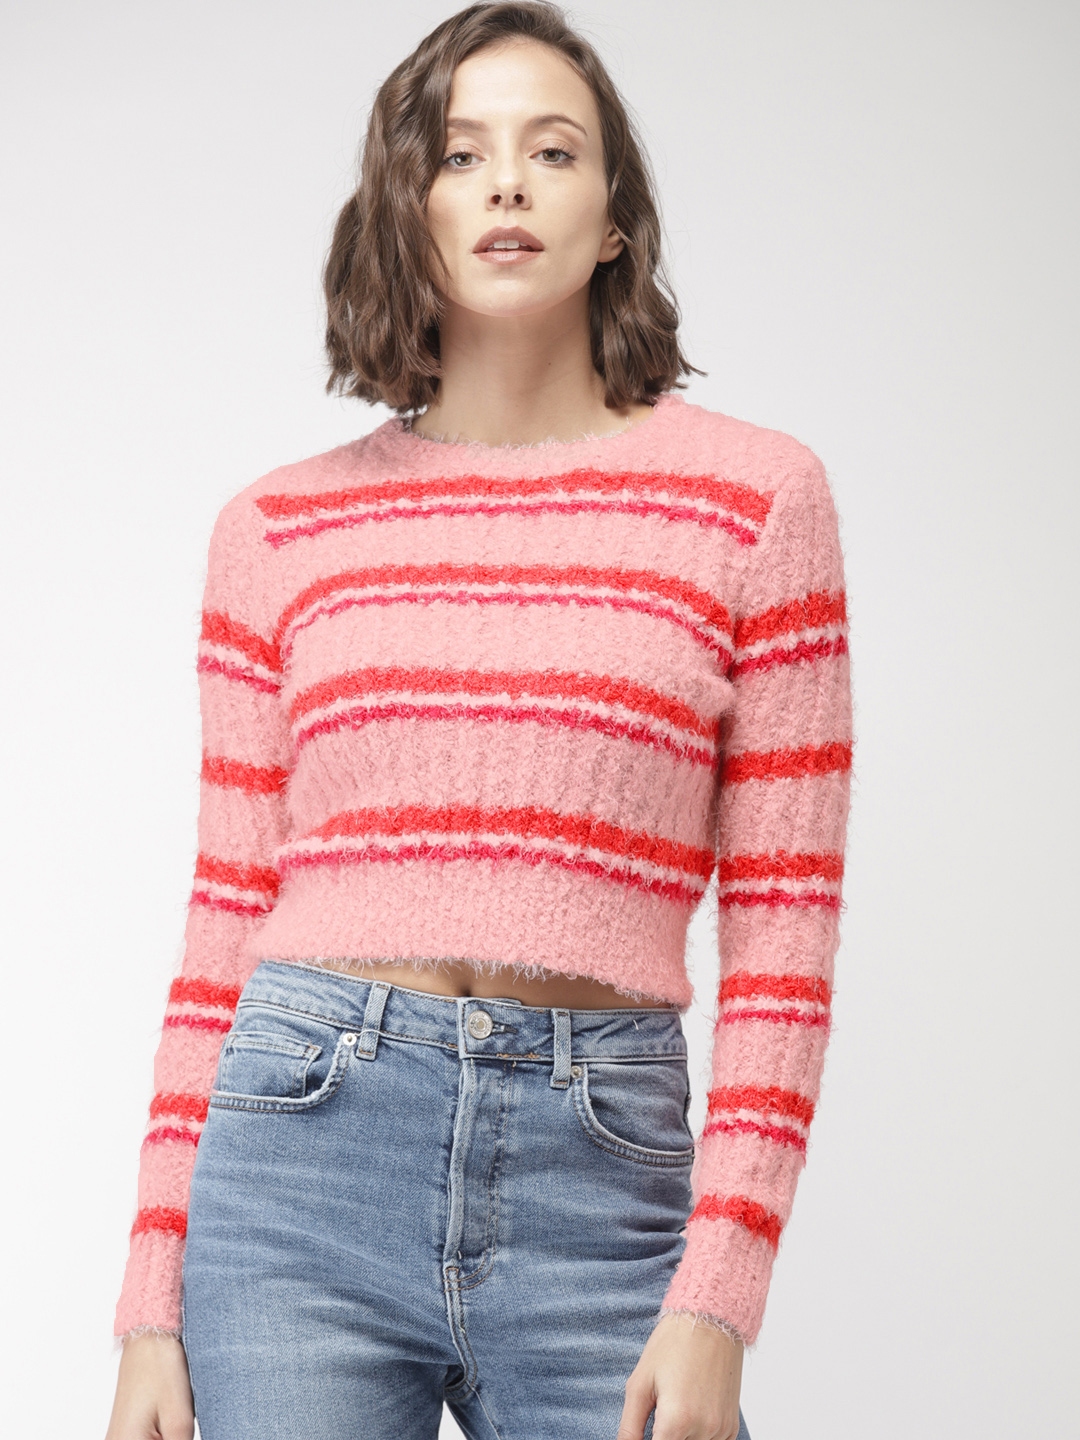 Buy FOREVER 21 Women Pink, Red & White Striped Crop Pullover Sweater - Sweaters for Women 